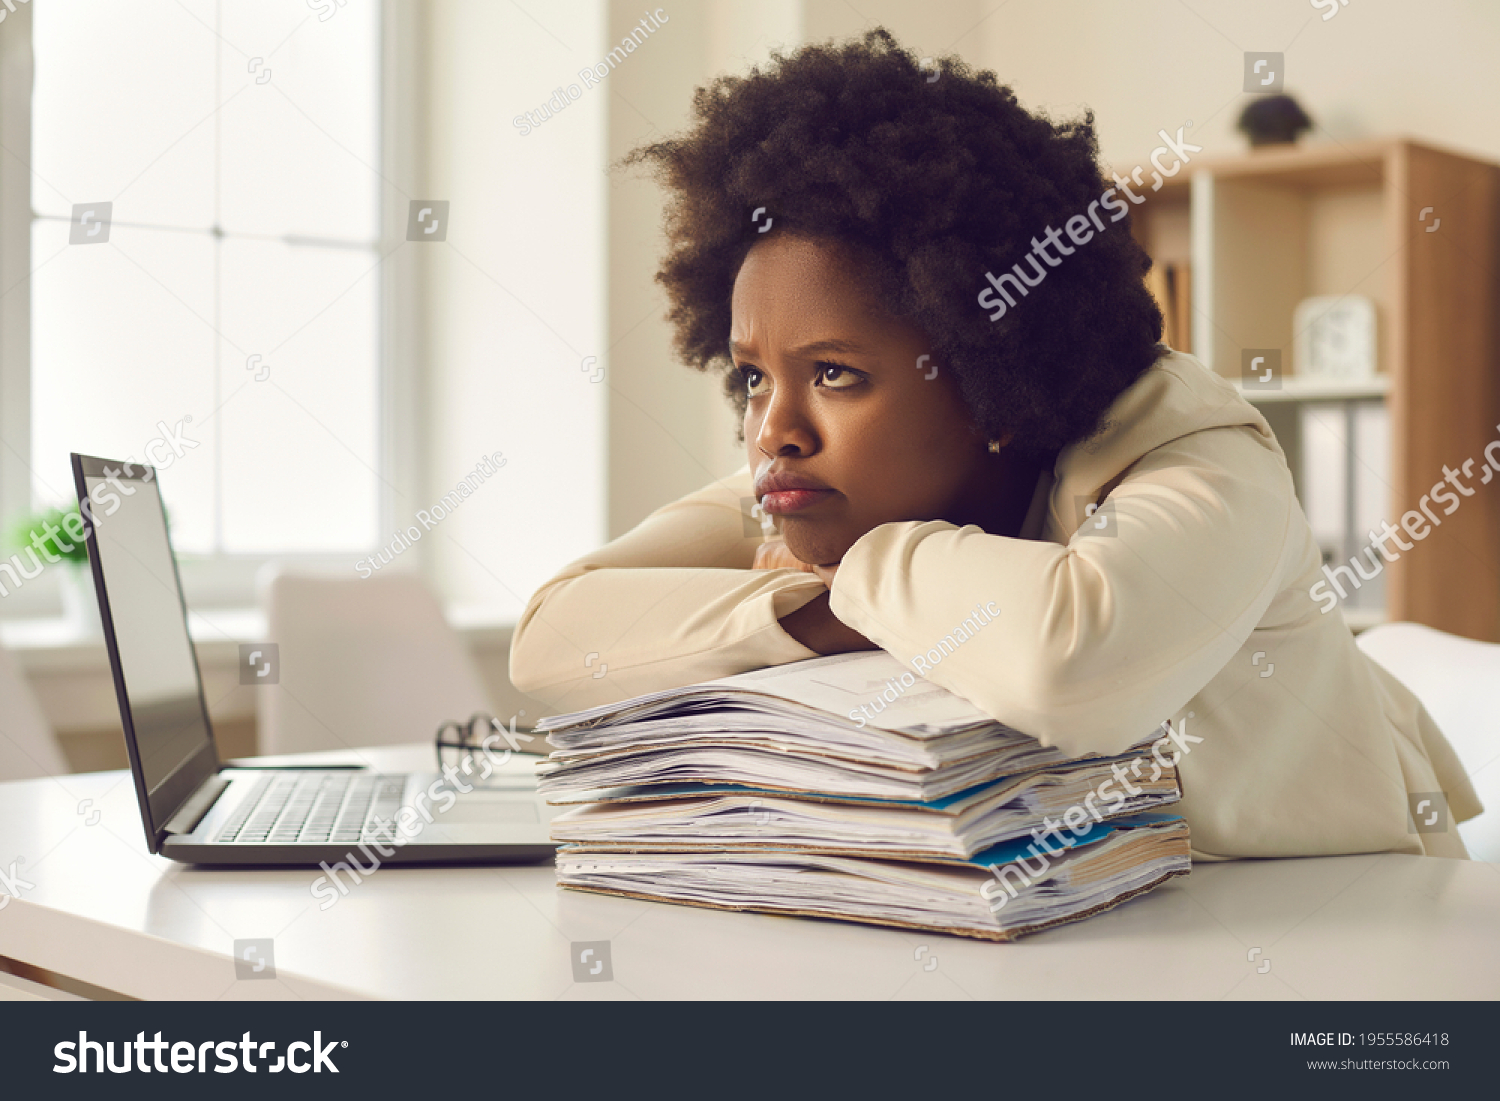 Bored unsatisfied young woman waiting for working day to end. Tired employee dissatisfied she has to work extra hours and do all paperwork sitting at office desk pouting lips with sad face expression #1955586418